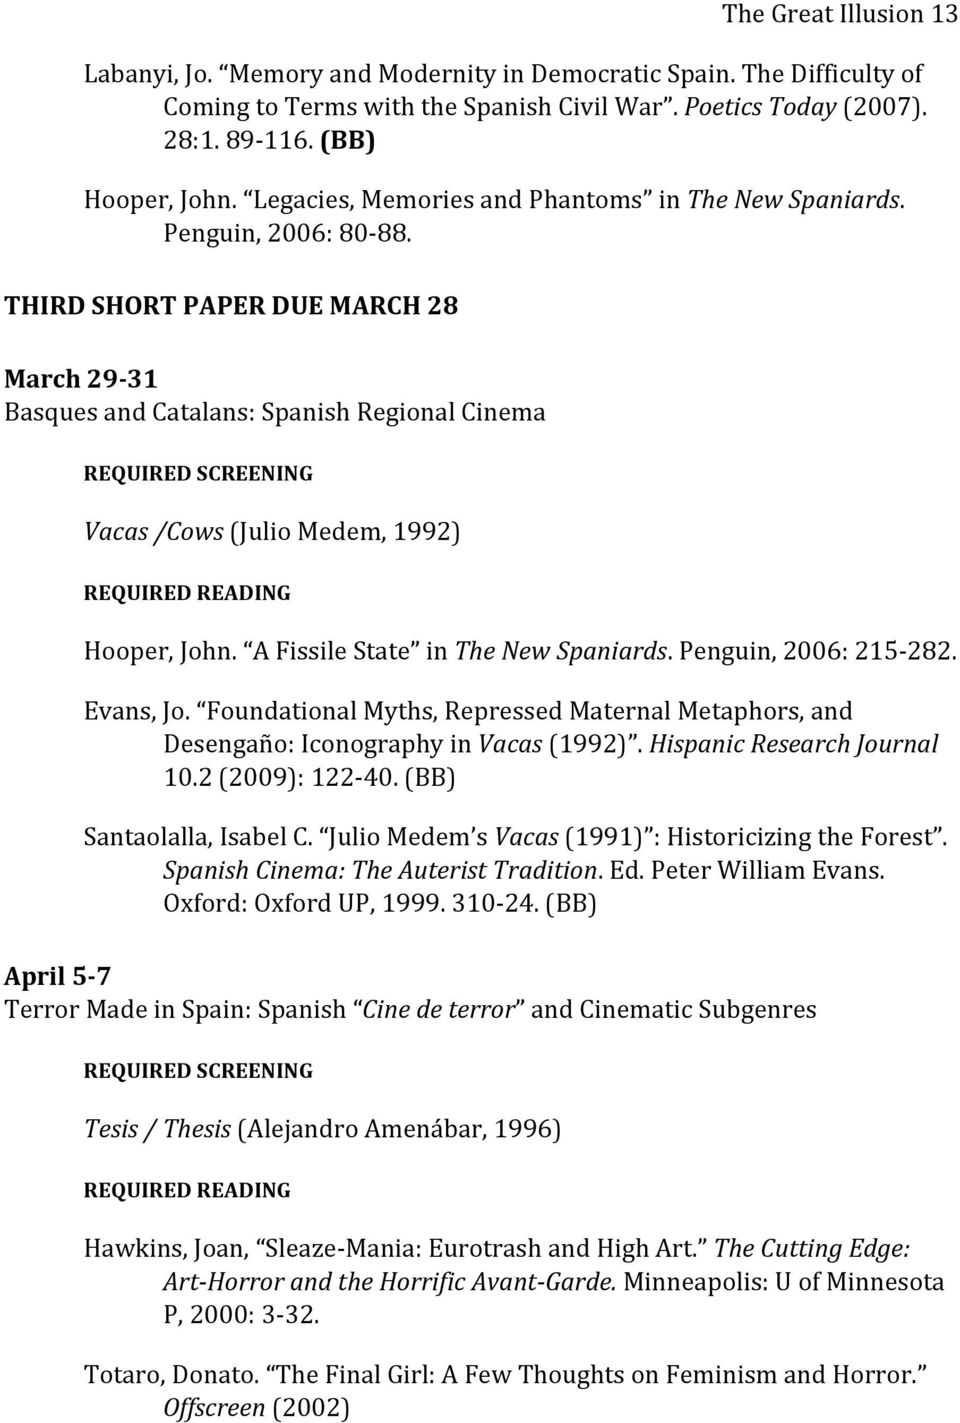 THIRD SHORT PAPER DUE MARCH 28 March 29 31 Basques and Catalans: Spanish Regional Cinema Vacas /Cows (Julio Medem, 1992) Hooper, John. A Fissile State in The New Spaniards. Penguin, 2006: 215 282.